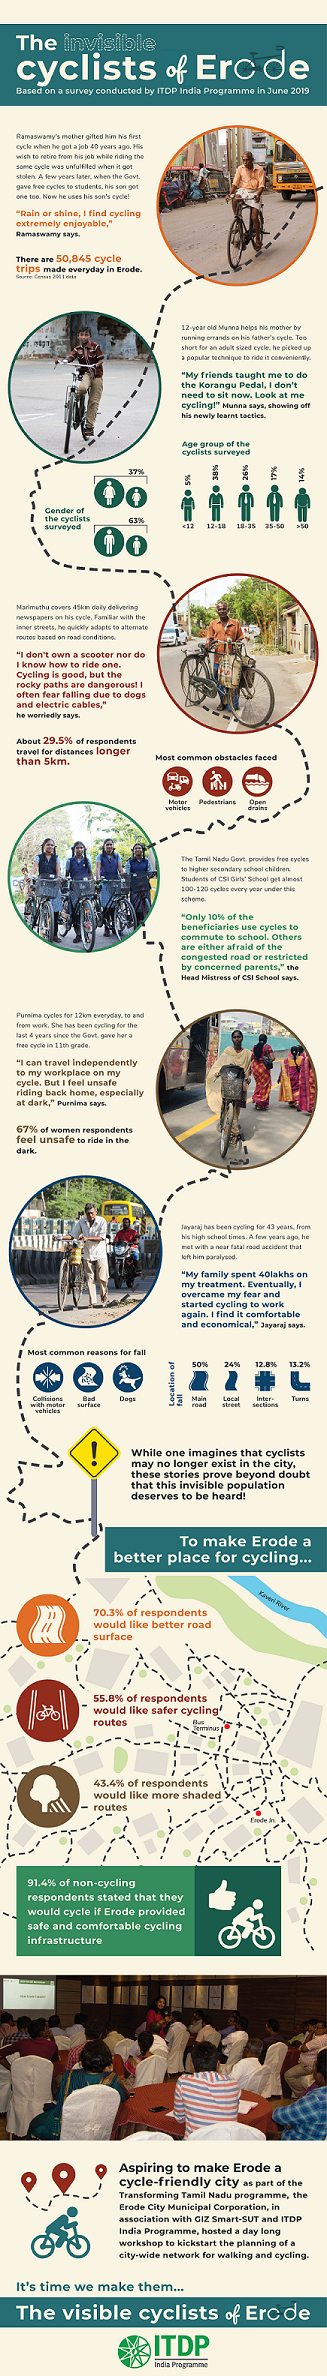 infographic about cycling in Erode, India